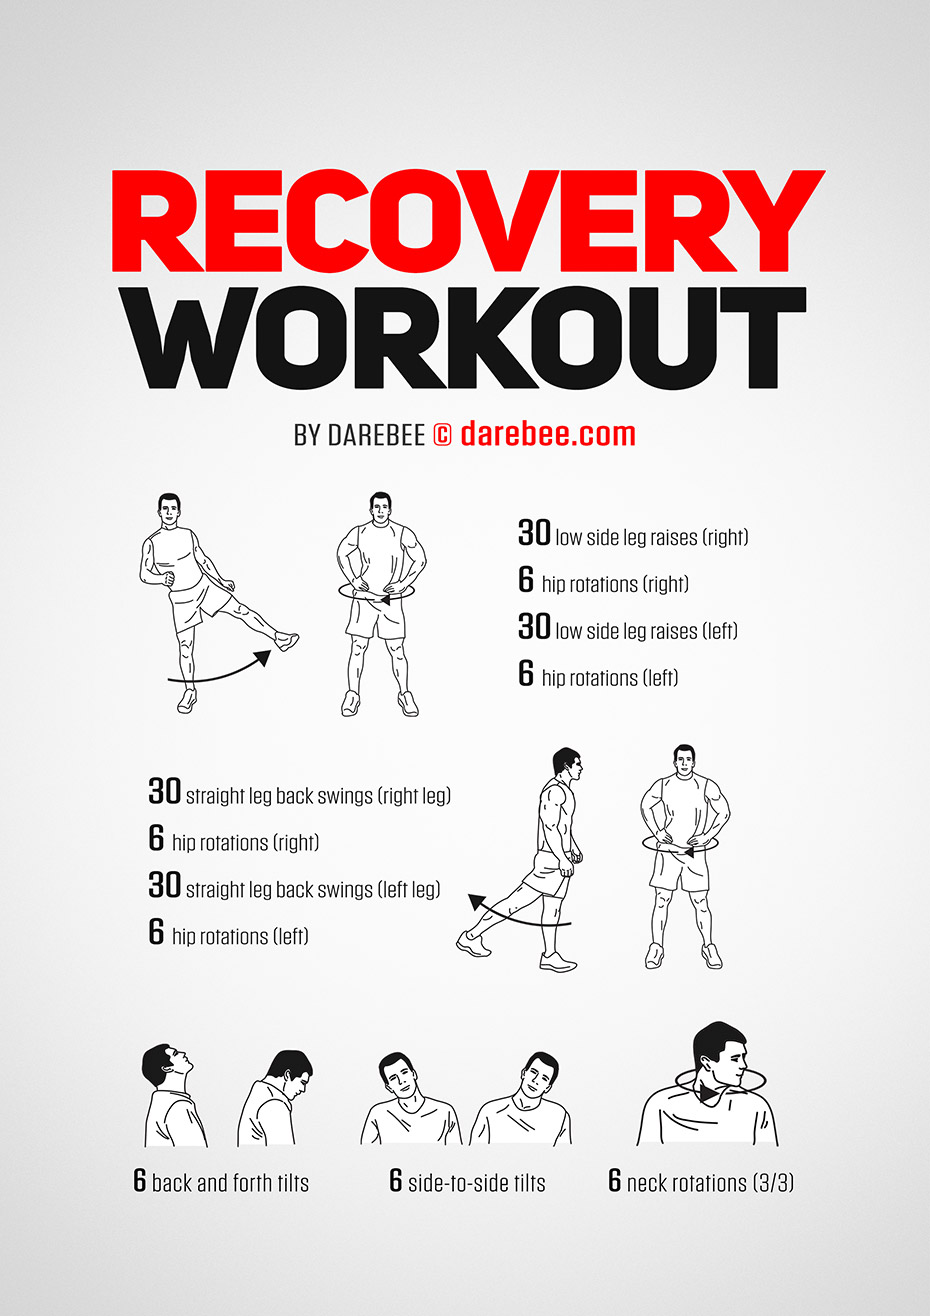 Muscle recovery routines